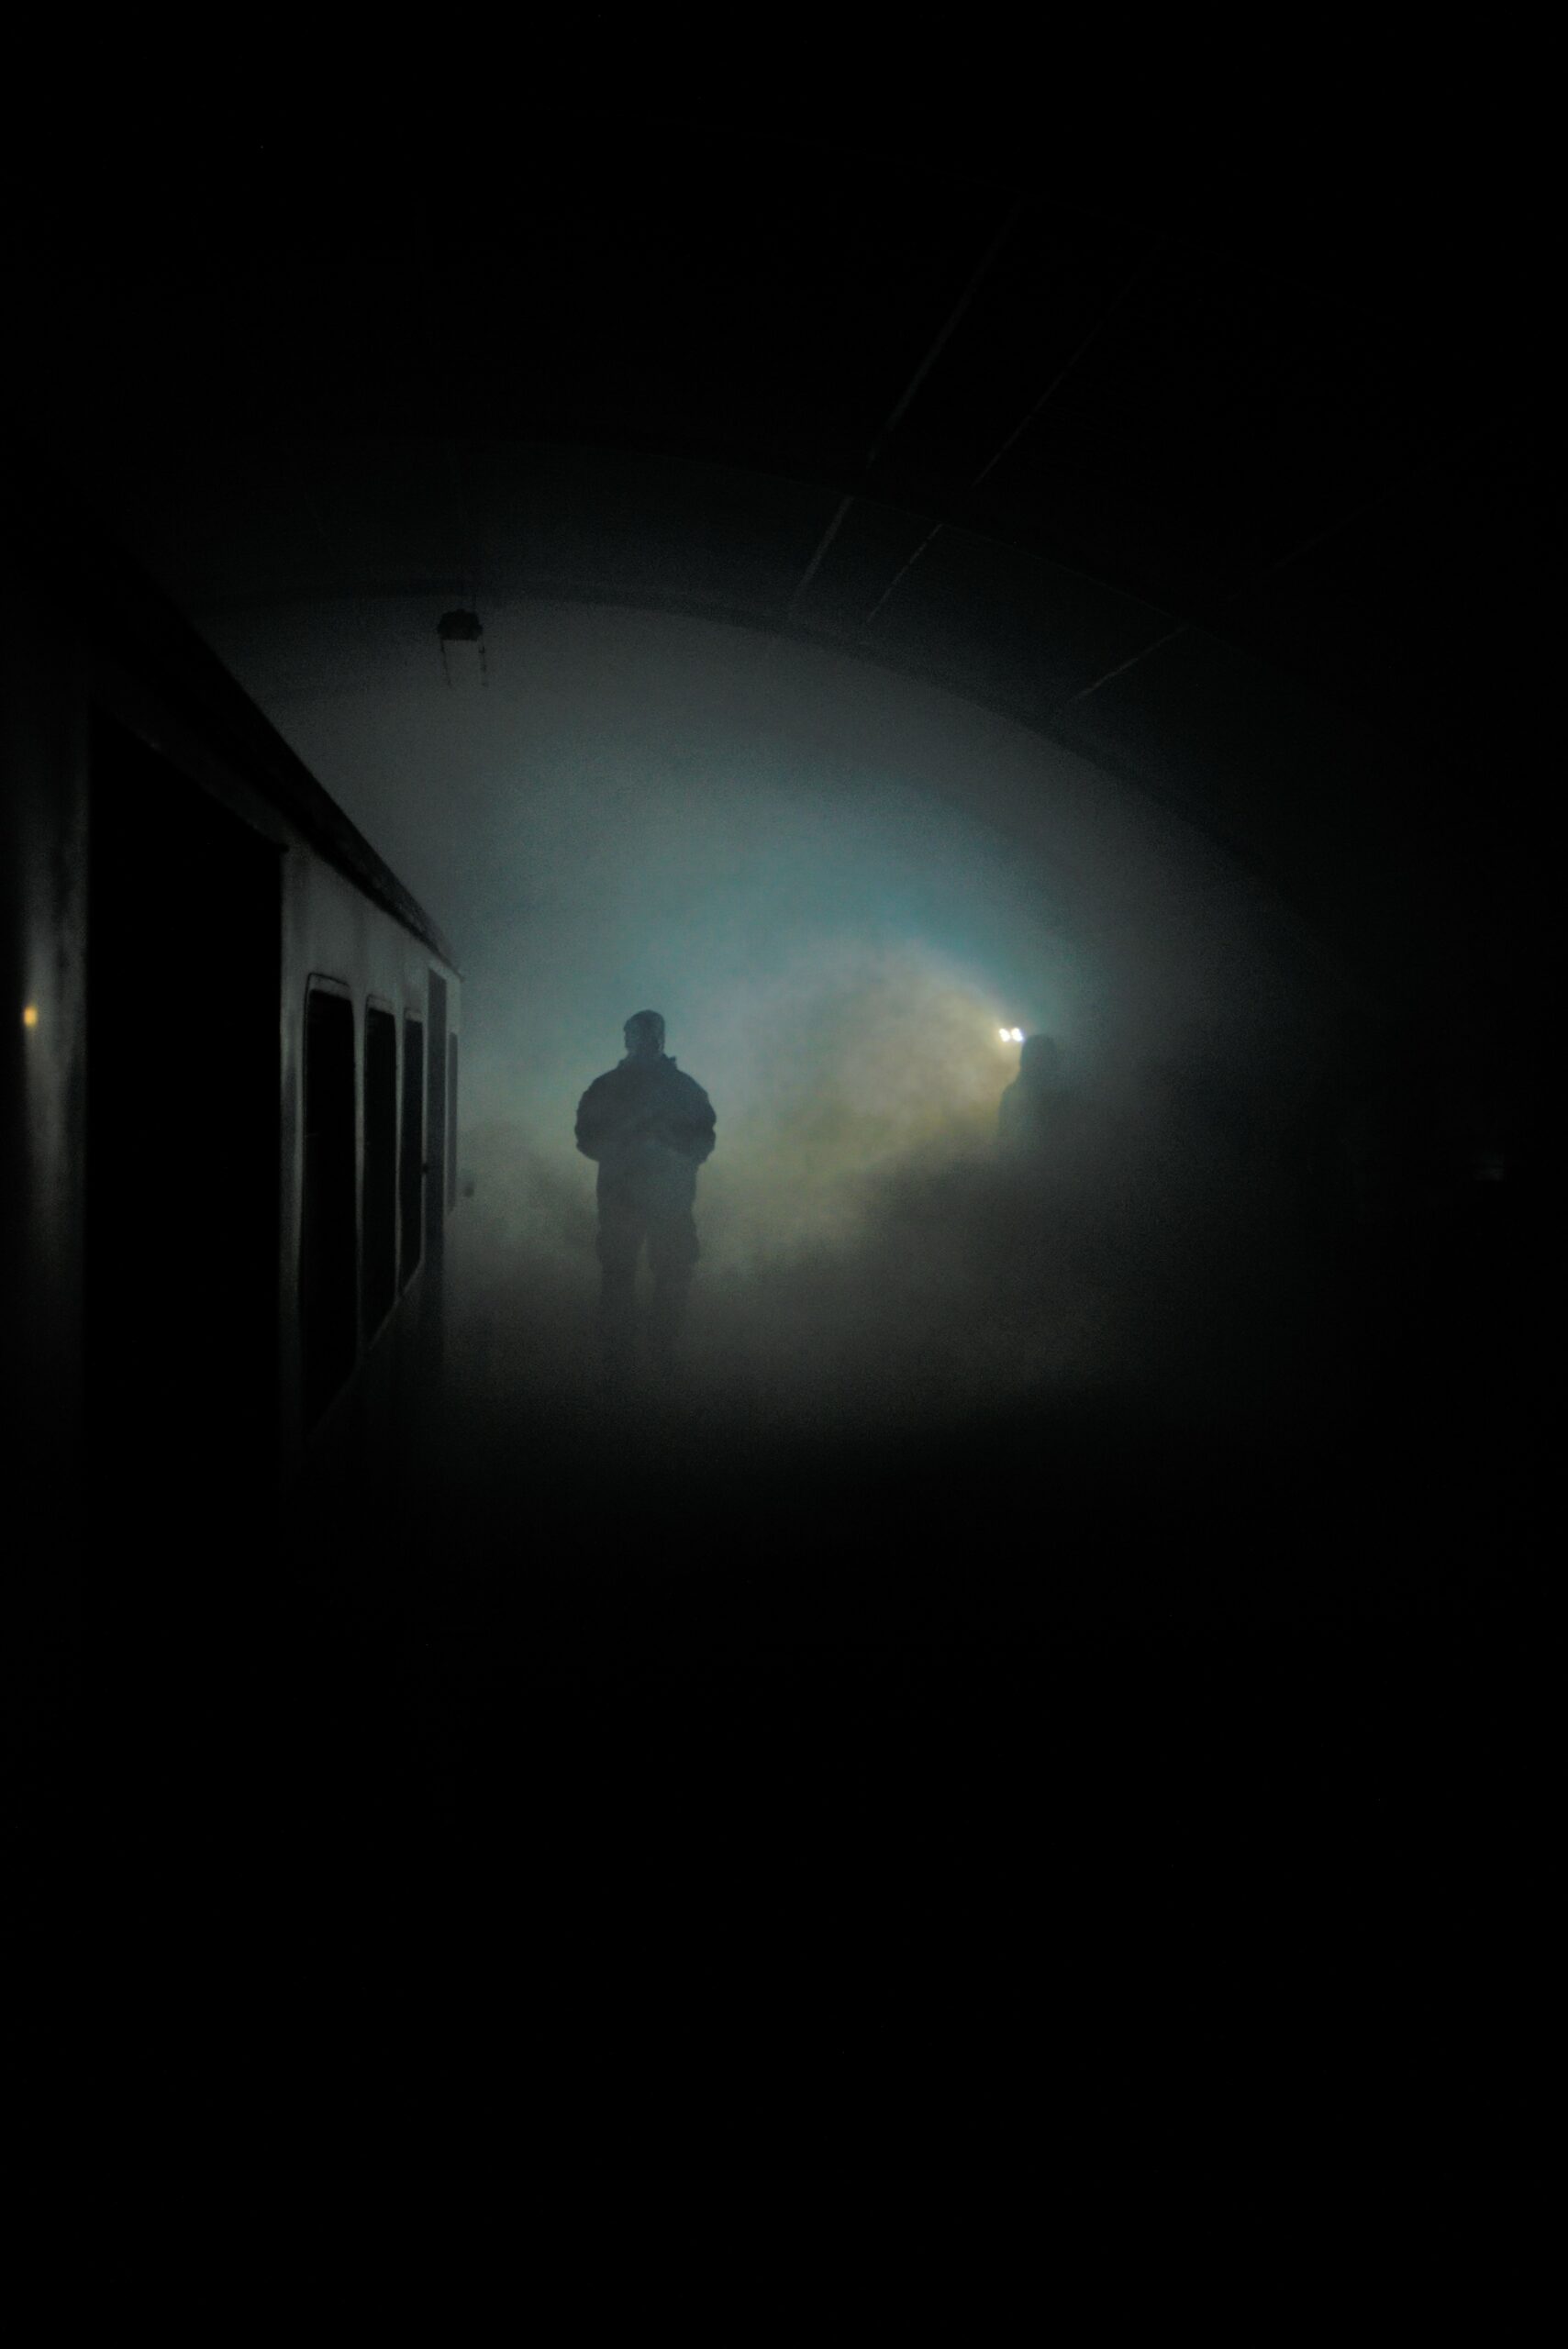 A man in the dark can be seen through the fog appearing near to the train platform. The train wagon is also slightly visible.